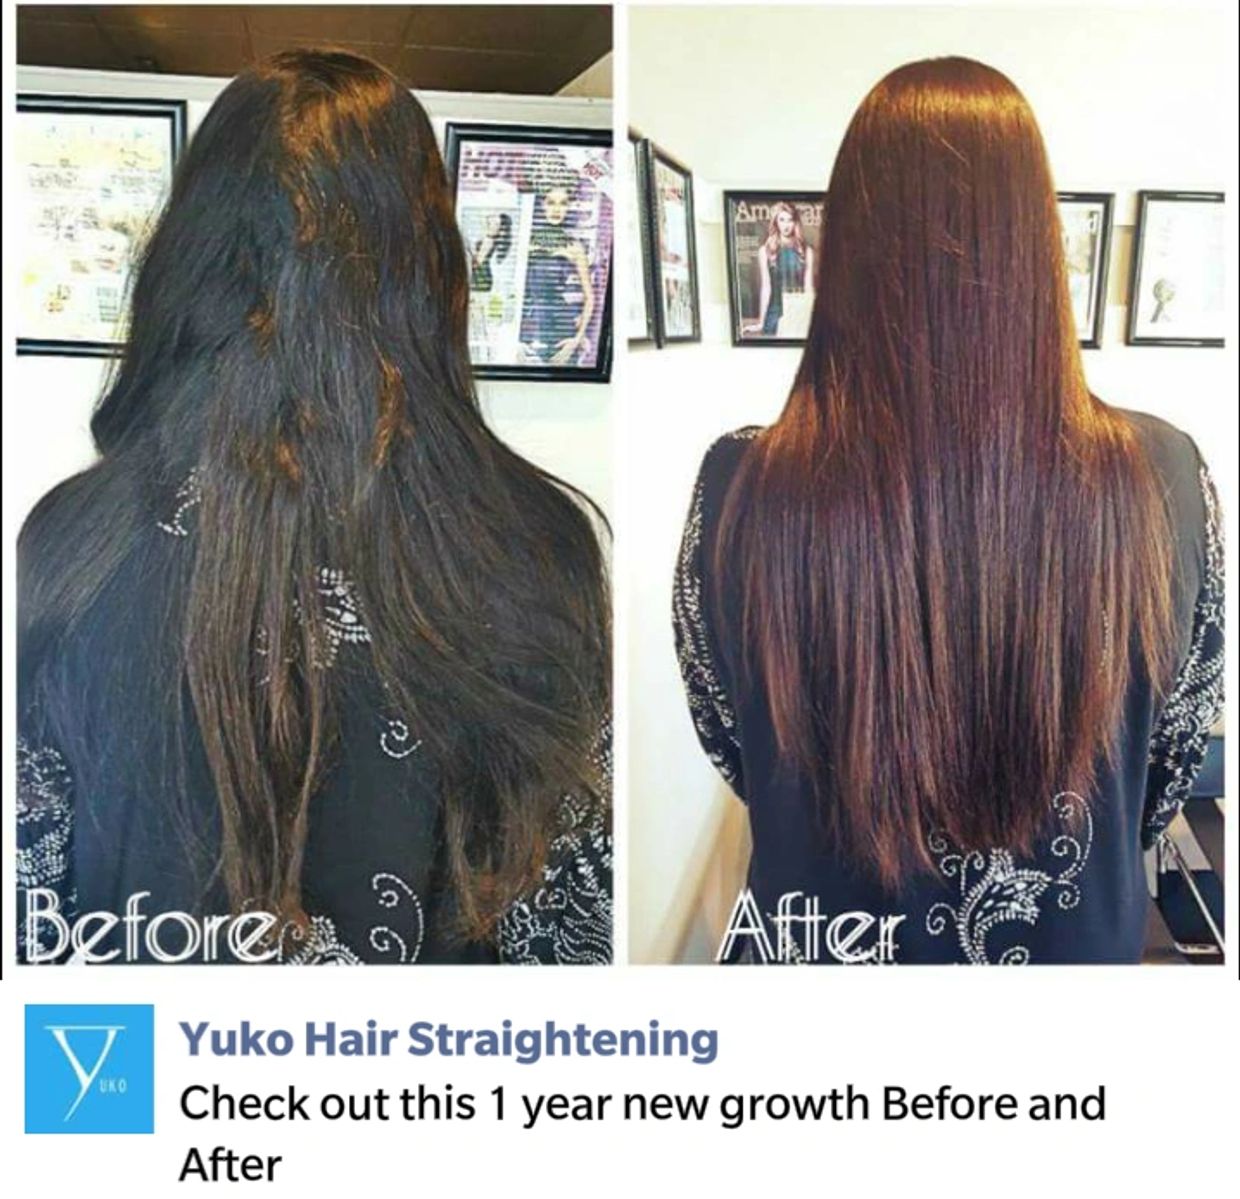 Transformation at its best! 18 month grow out, natural non-colored hair. Schedule your YUKO Straight